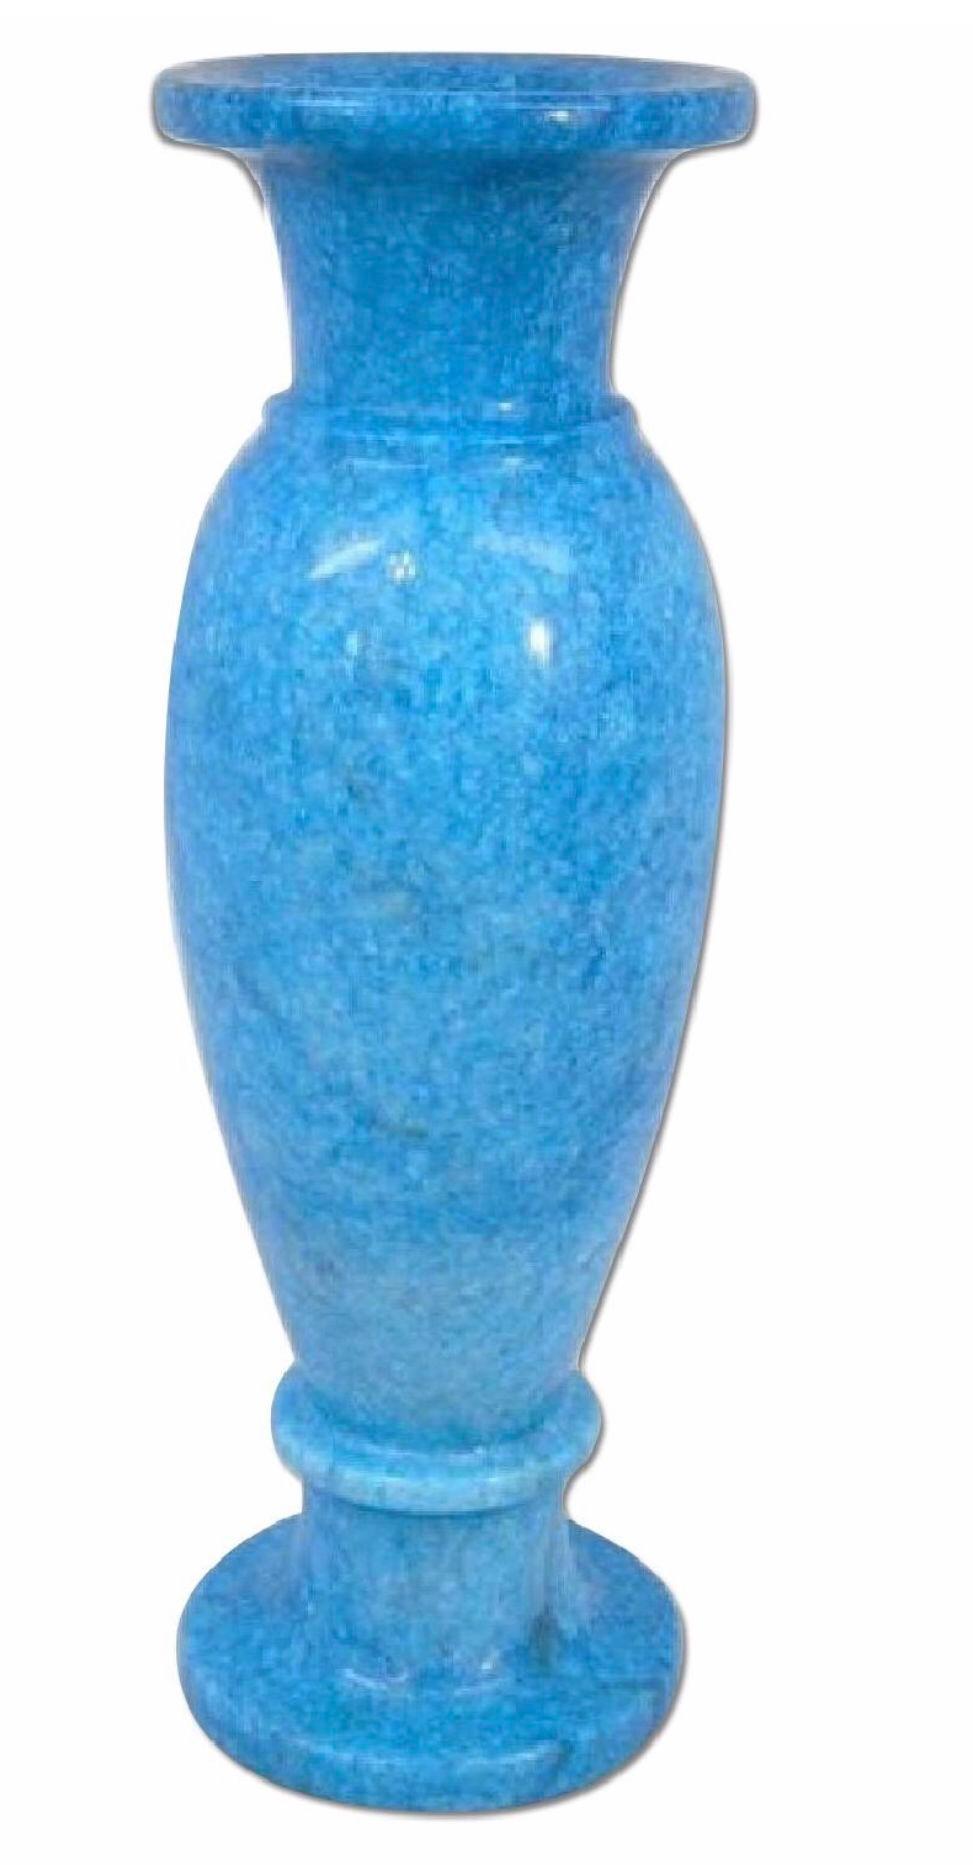 Substantial stone vase in vibrant turquoise hue with classically idealized geometry and postmodern use of color. Finely burnished for a smoothness. A stunning addition to any room.


